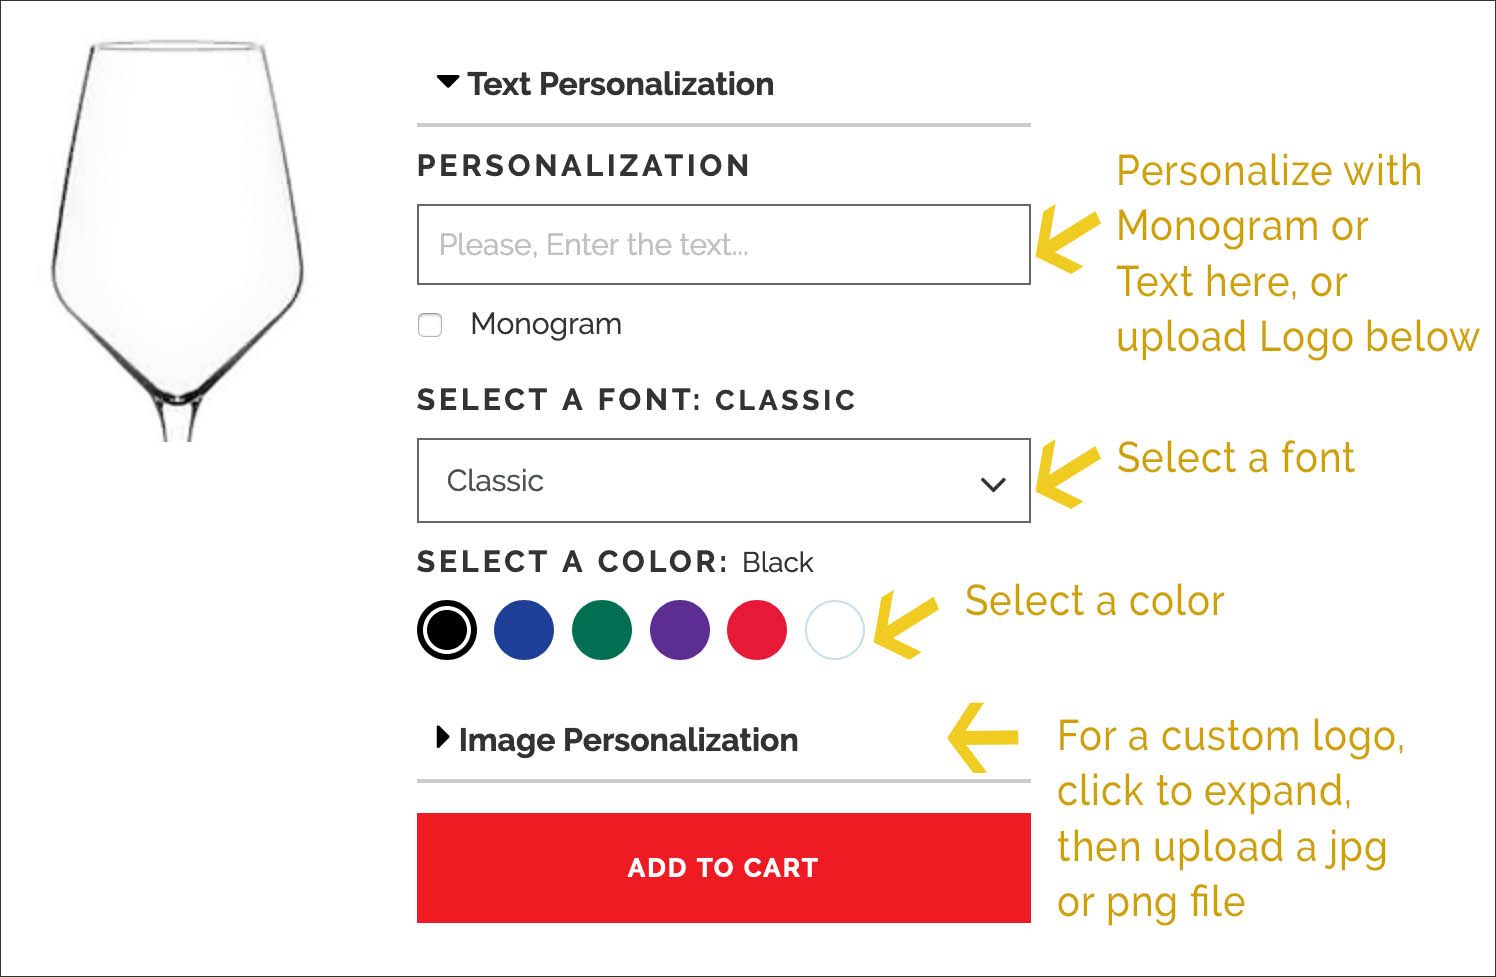 Guide to personalizing items in the imprint popup.